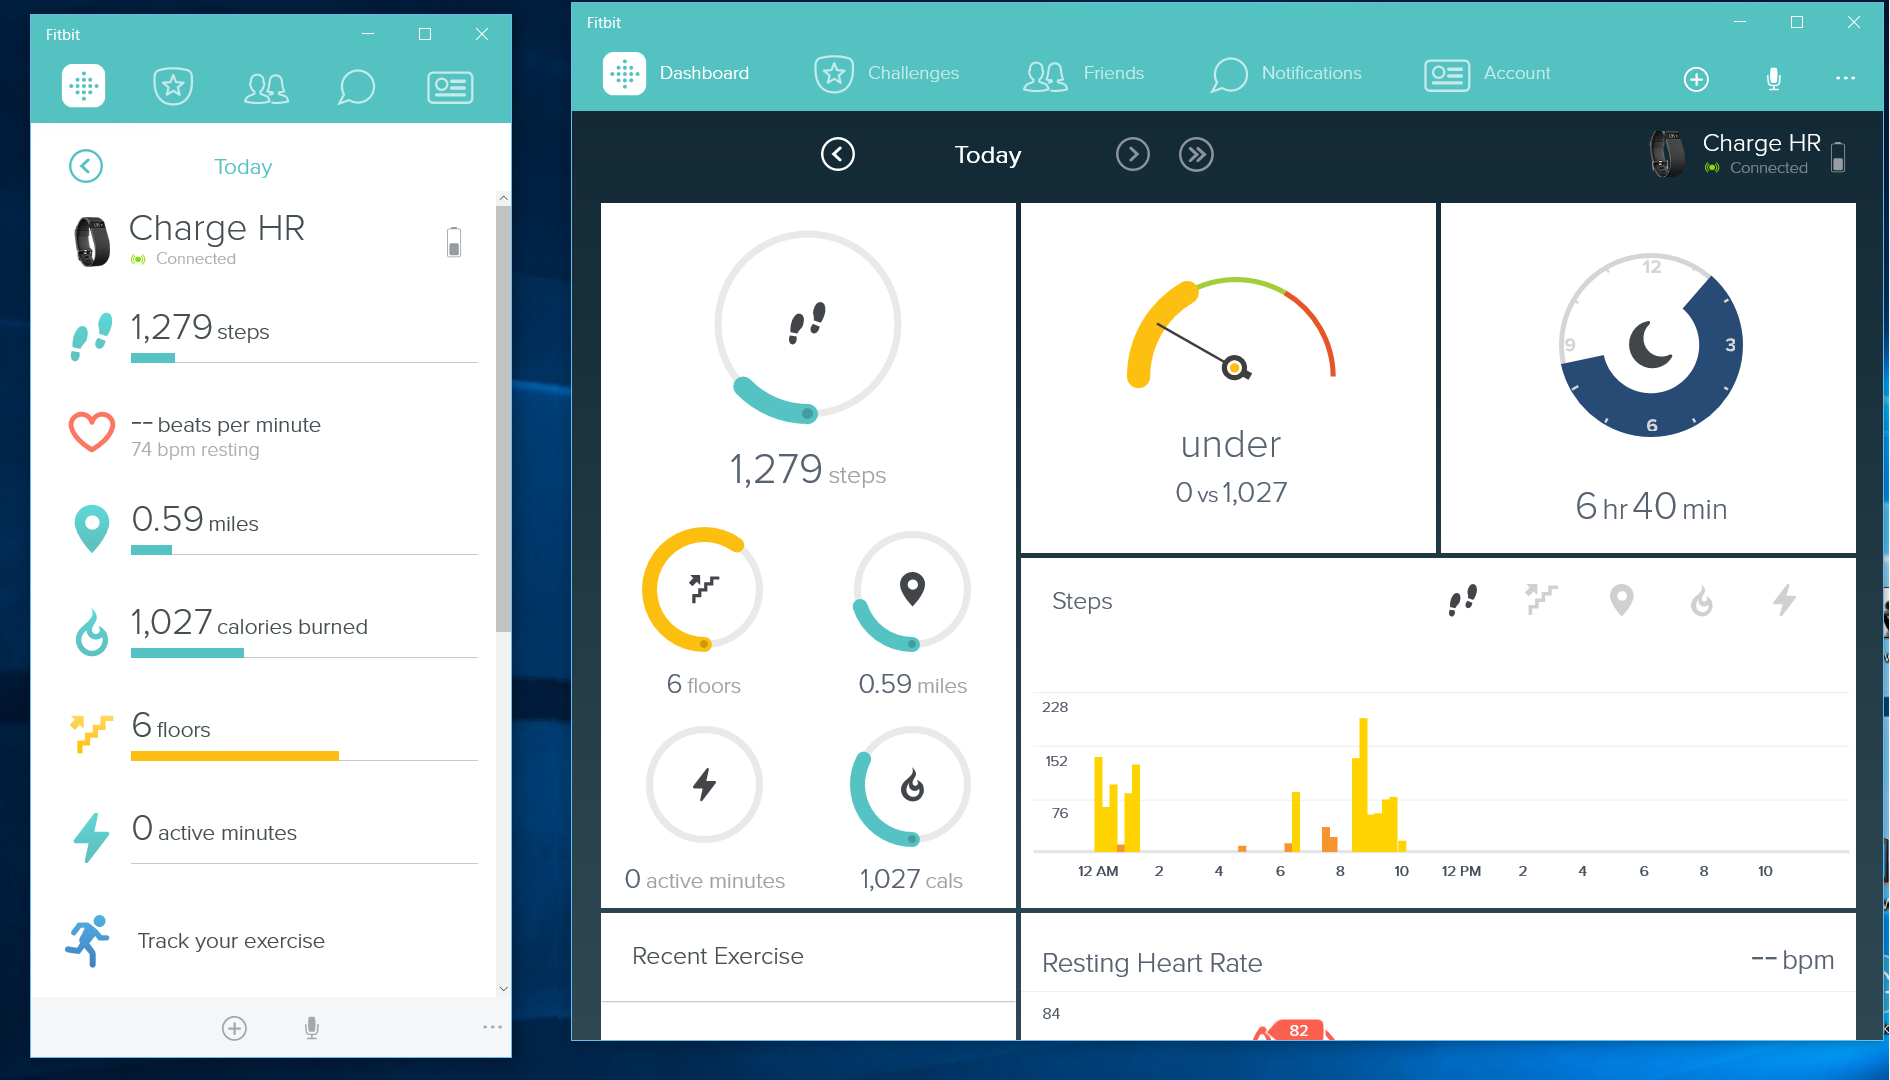 fitbit for pc windows 10